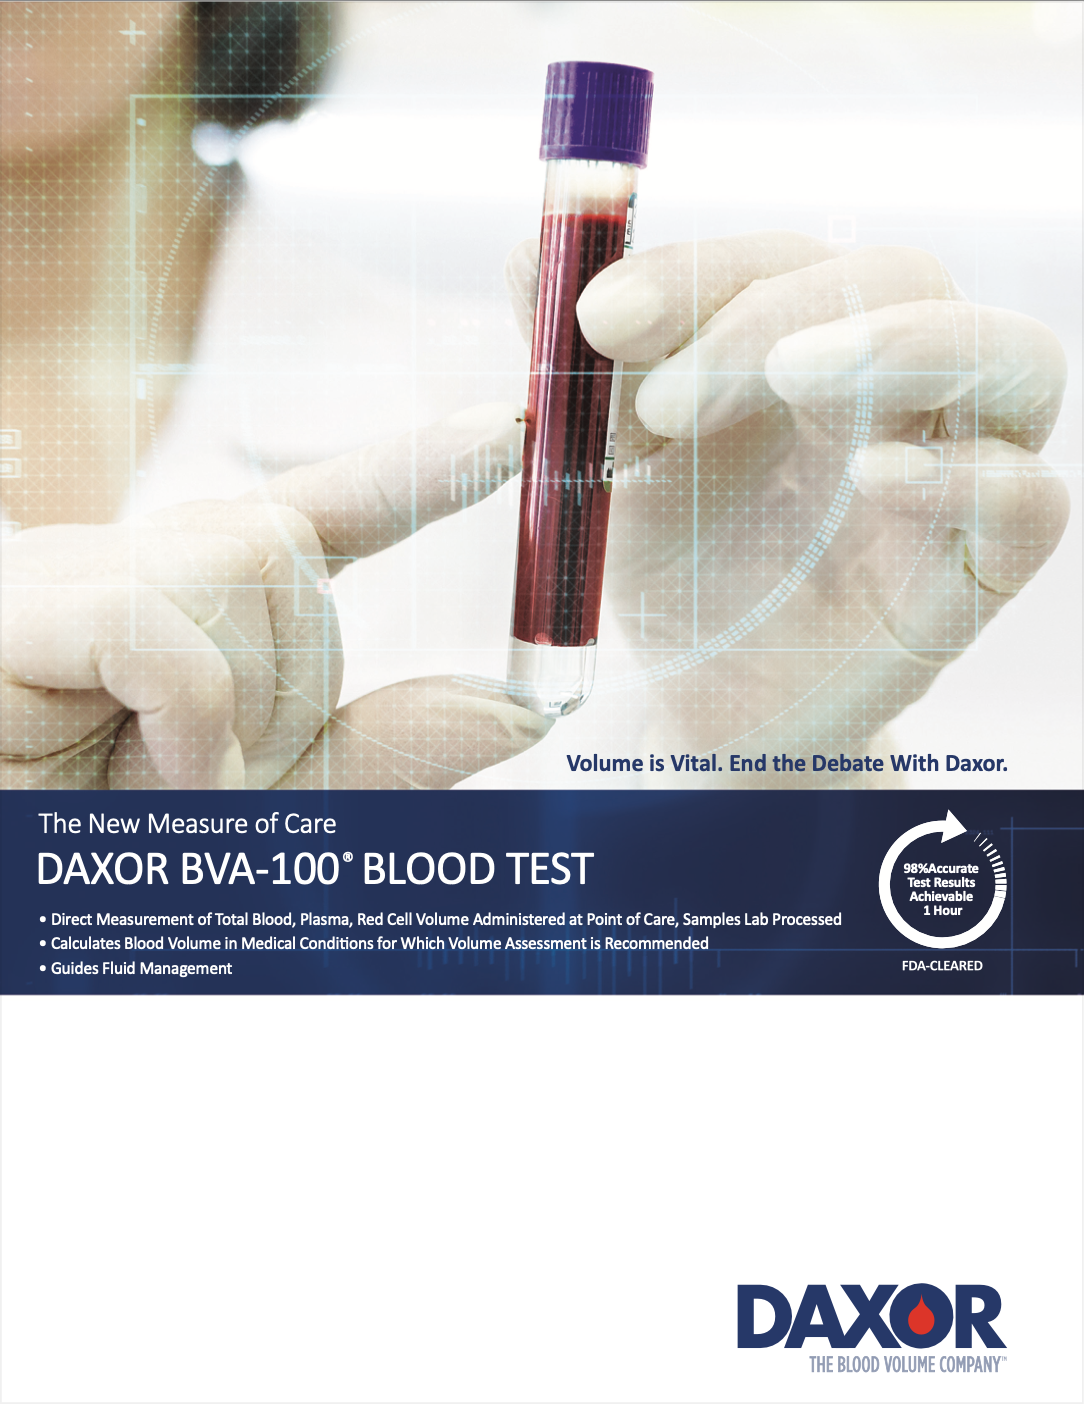 Image: BVA-100 is the first FDA-cleared diagnostic blood test for quantification of blood volume status (Photo courtesy of Daxor Corporation)